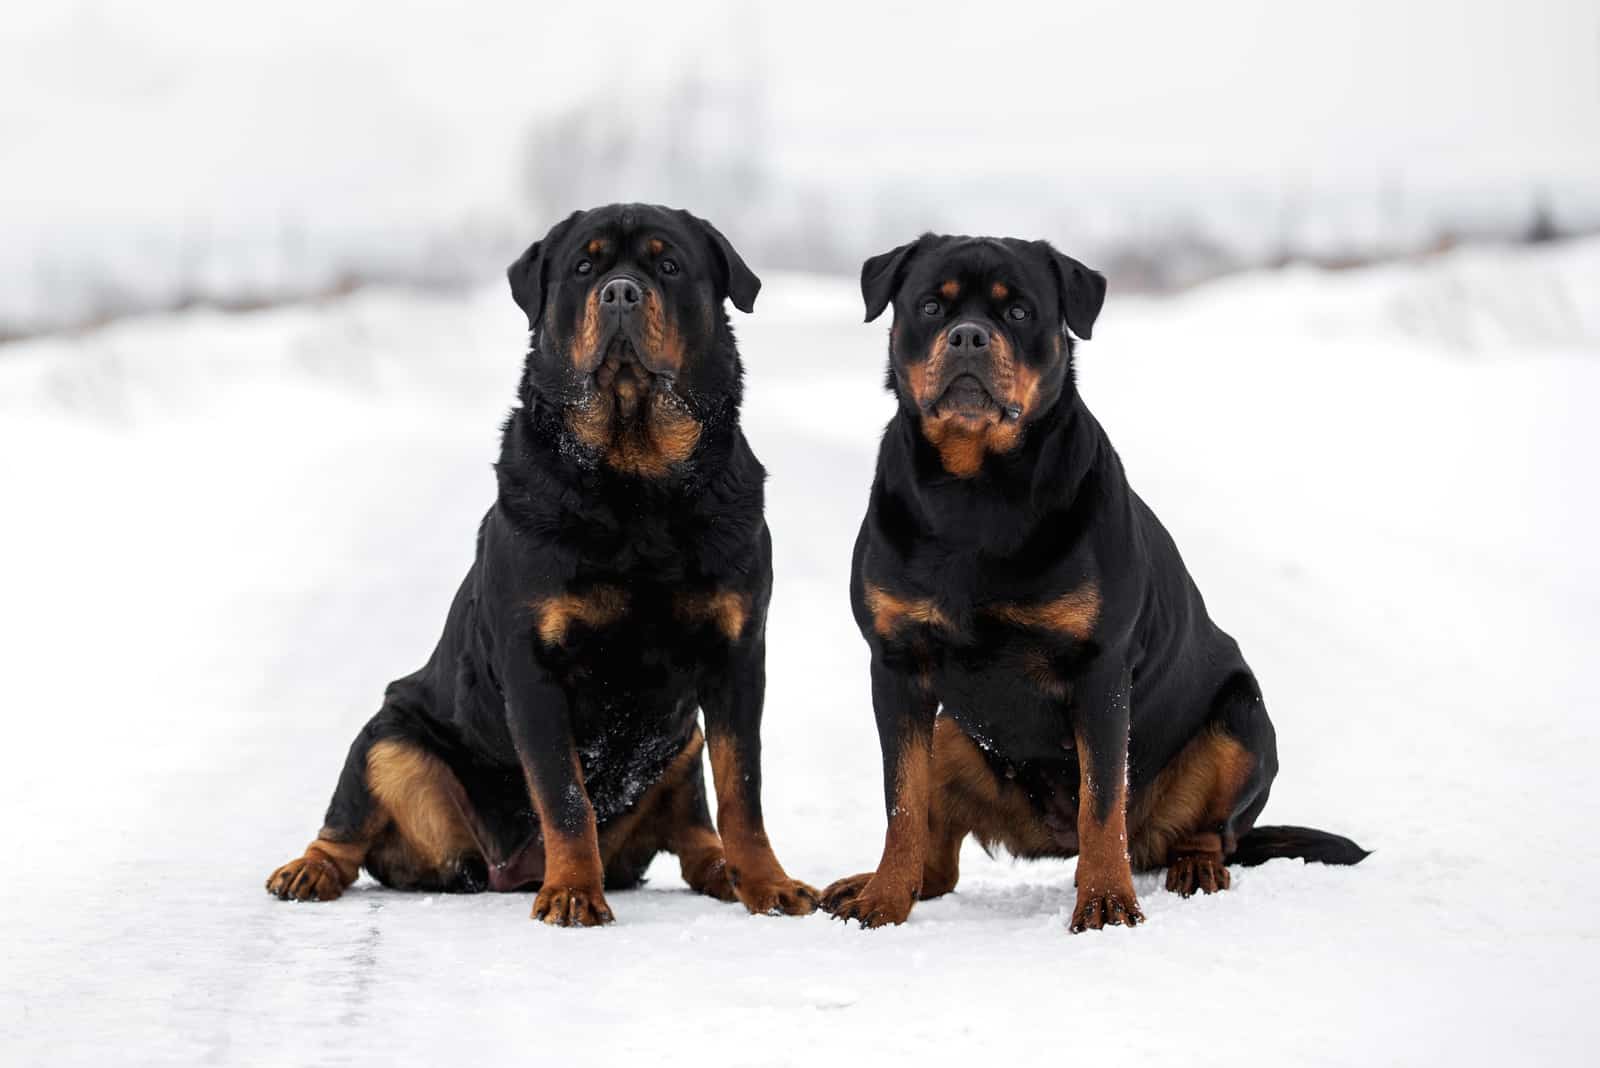 two Rottweiler dogs are sitting outside in the snow